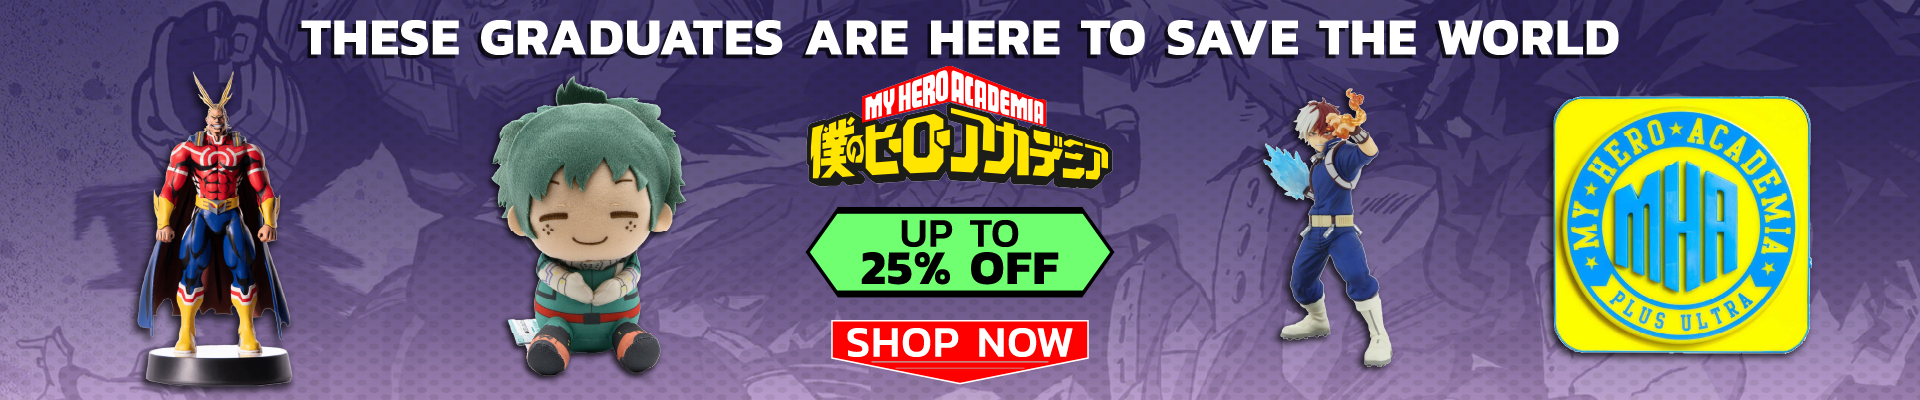 My Hero Academia - These Graduates Are Here to Save the World